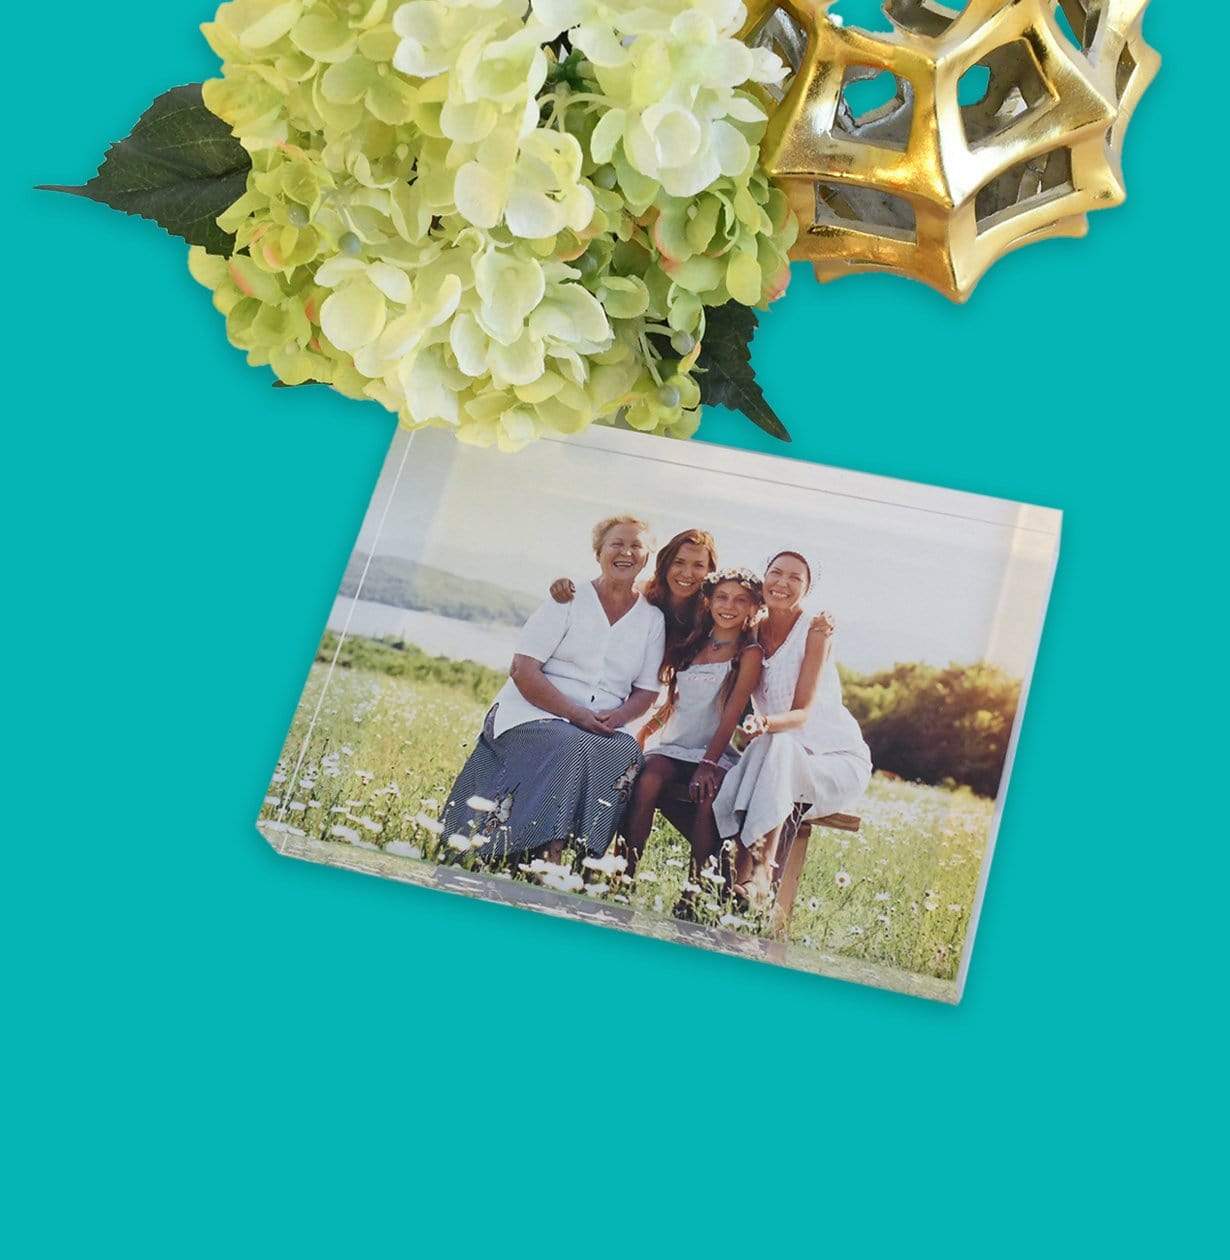 Acrylic Block - The Perfect Photo Gift Idea for Friends